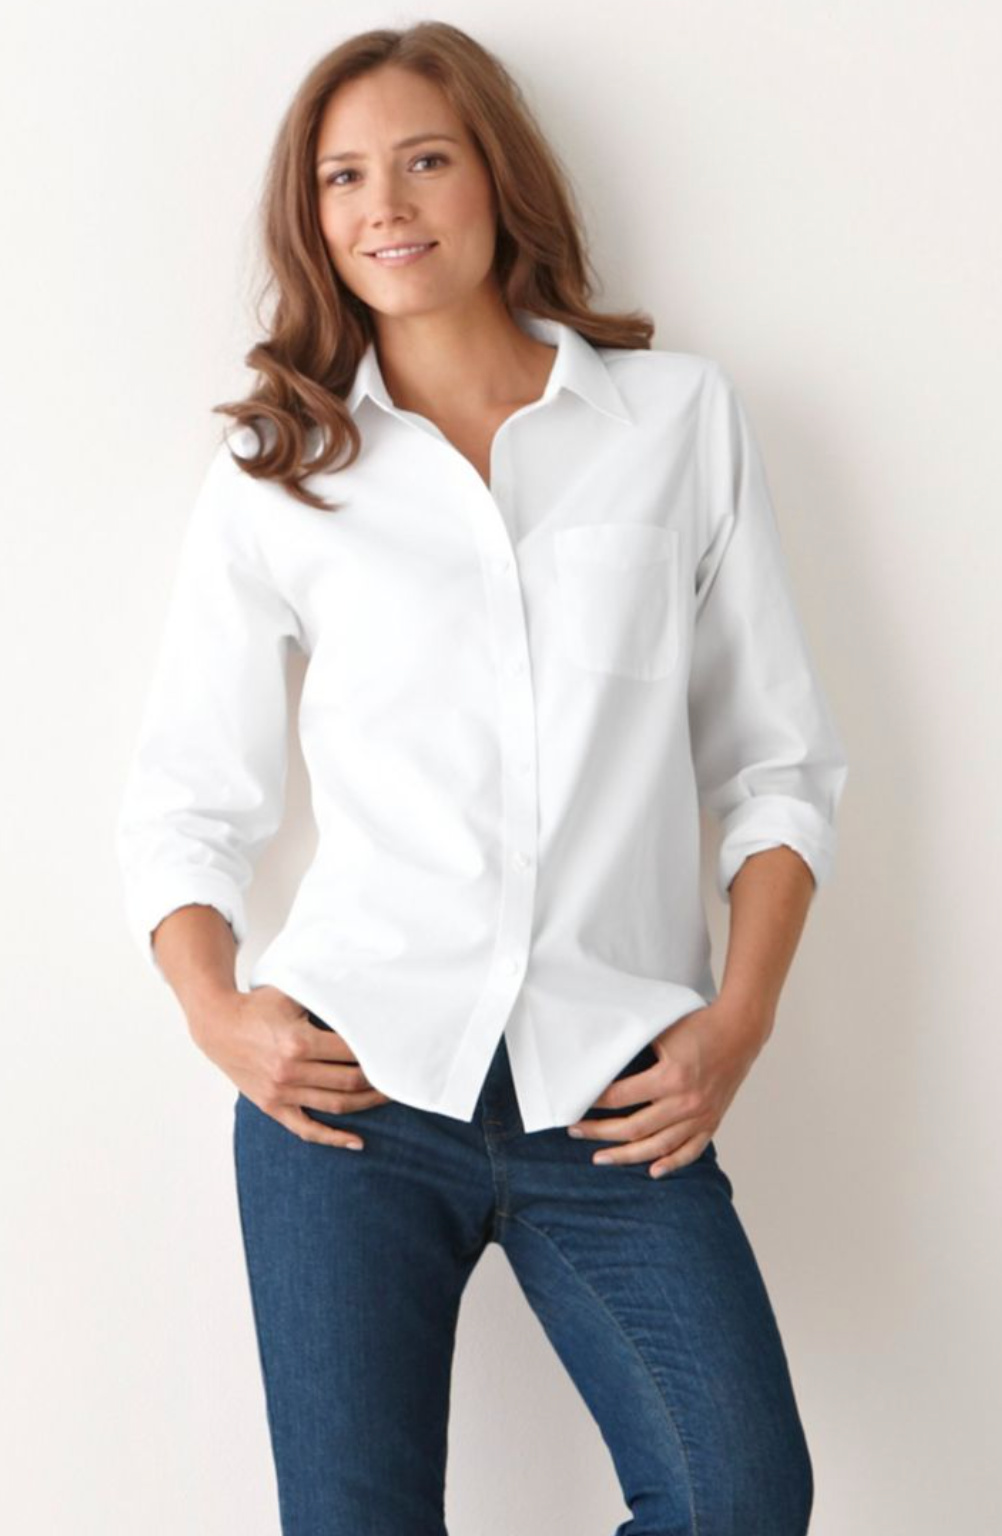 These Women's Wrinkle Free Shirts Will Make Packing a Breeze